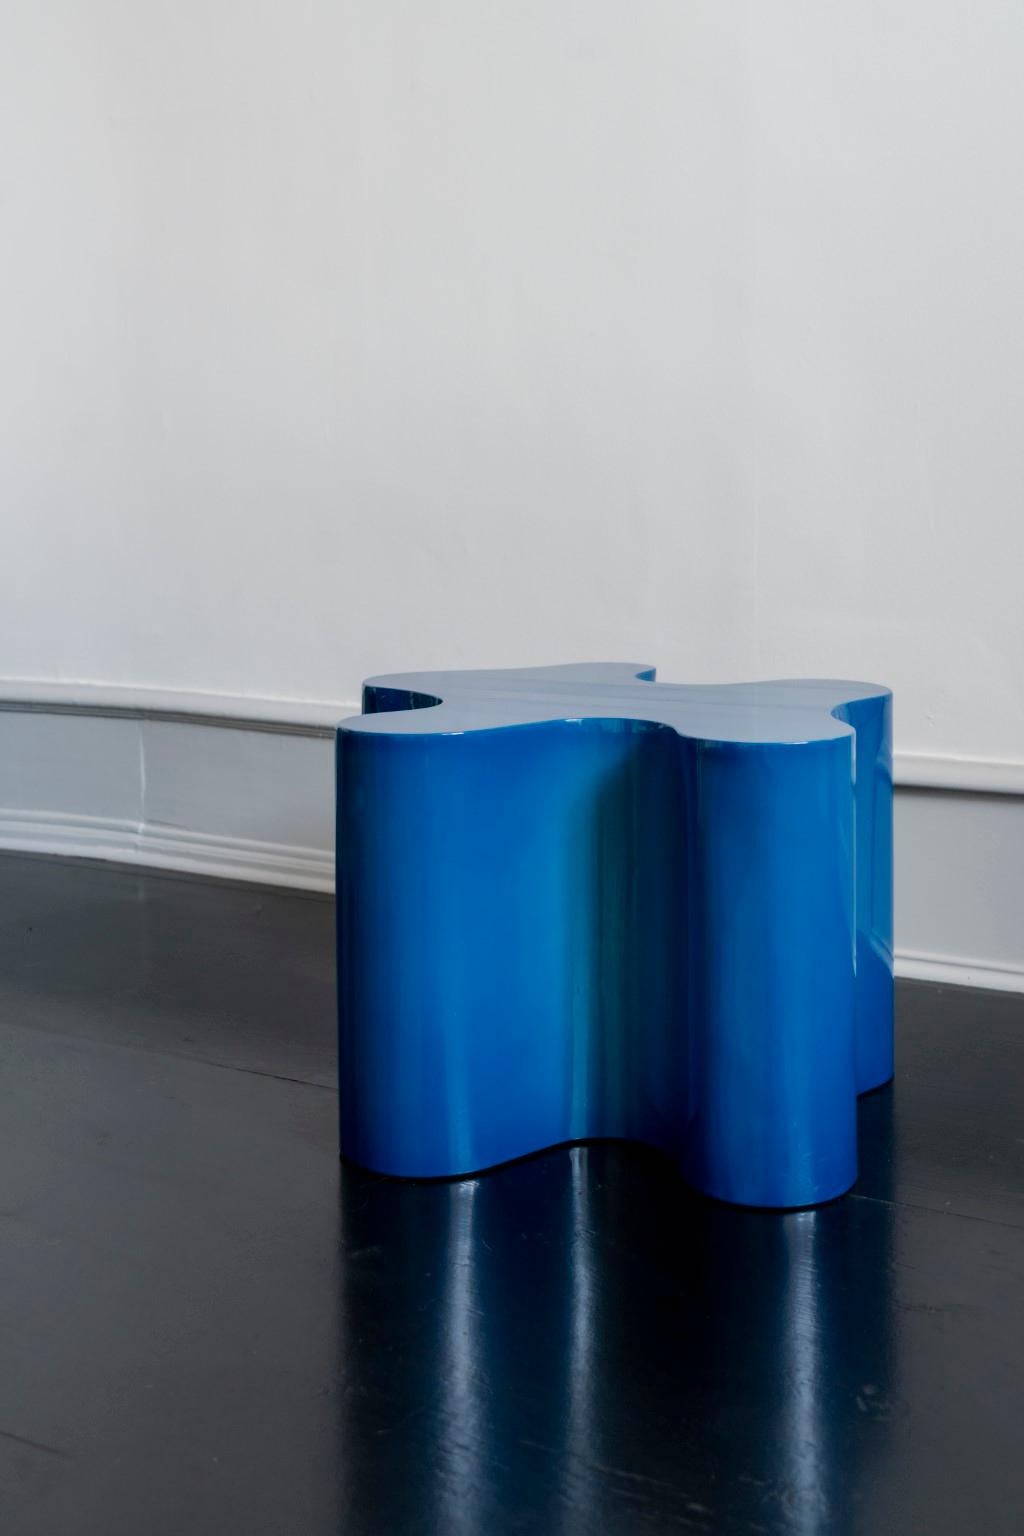 Sofa table by Caia Leifsdotter
Materials: Metallic Blue
Dimensions: W 60 x 40 cm
Also available with Marble Fioro Di Bosco Ø 90 cm

The design studio of Caia Leifsdotter designs bespoke objects for clients & projects. A bespoke object is a